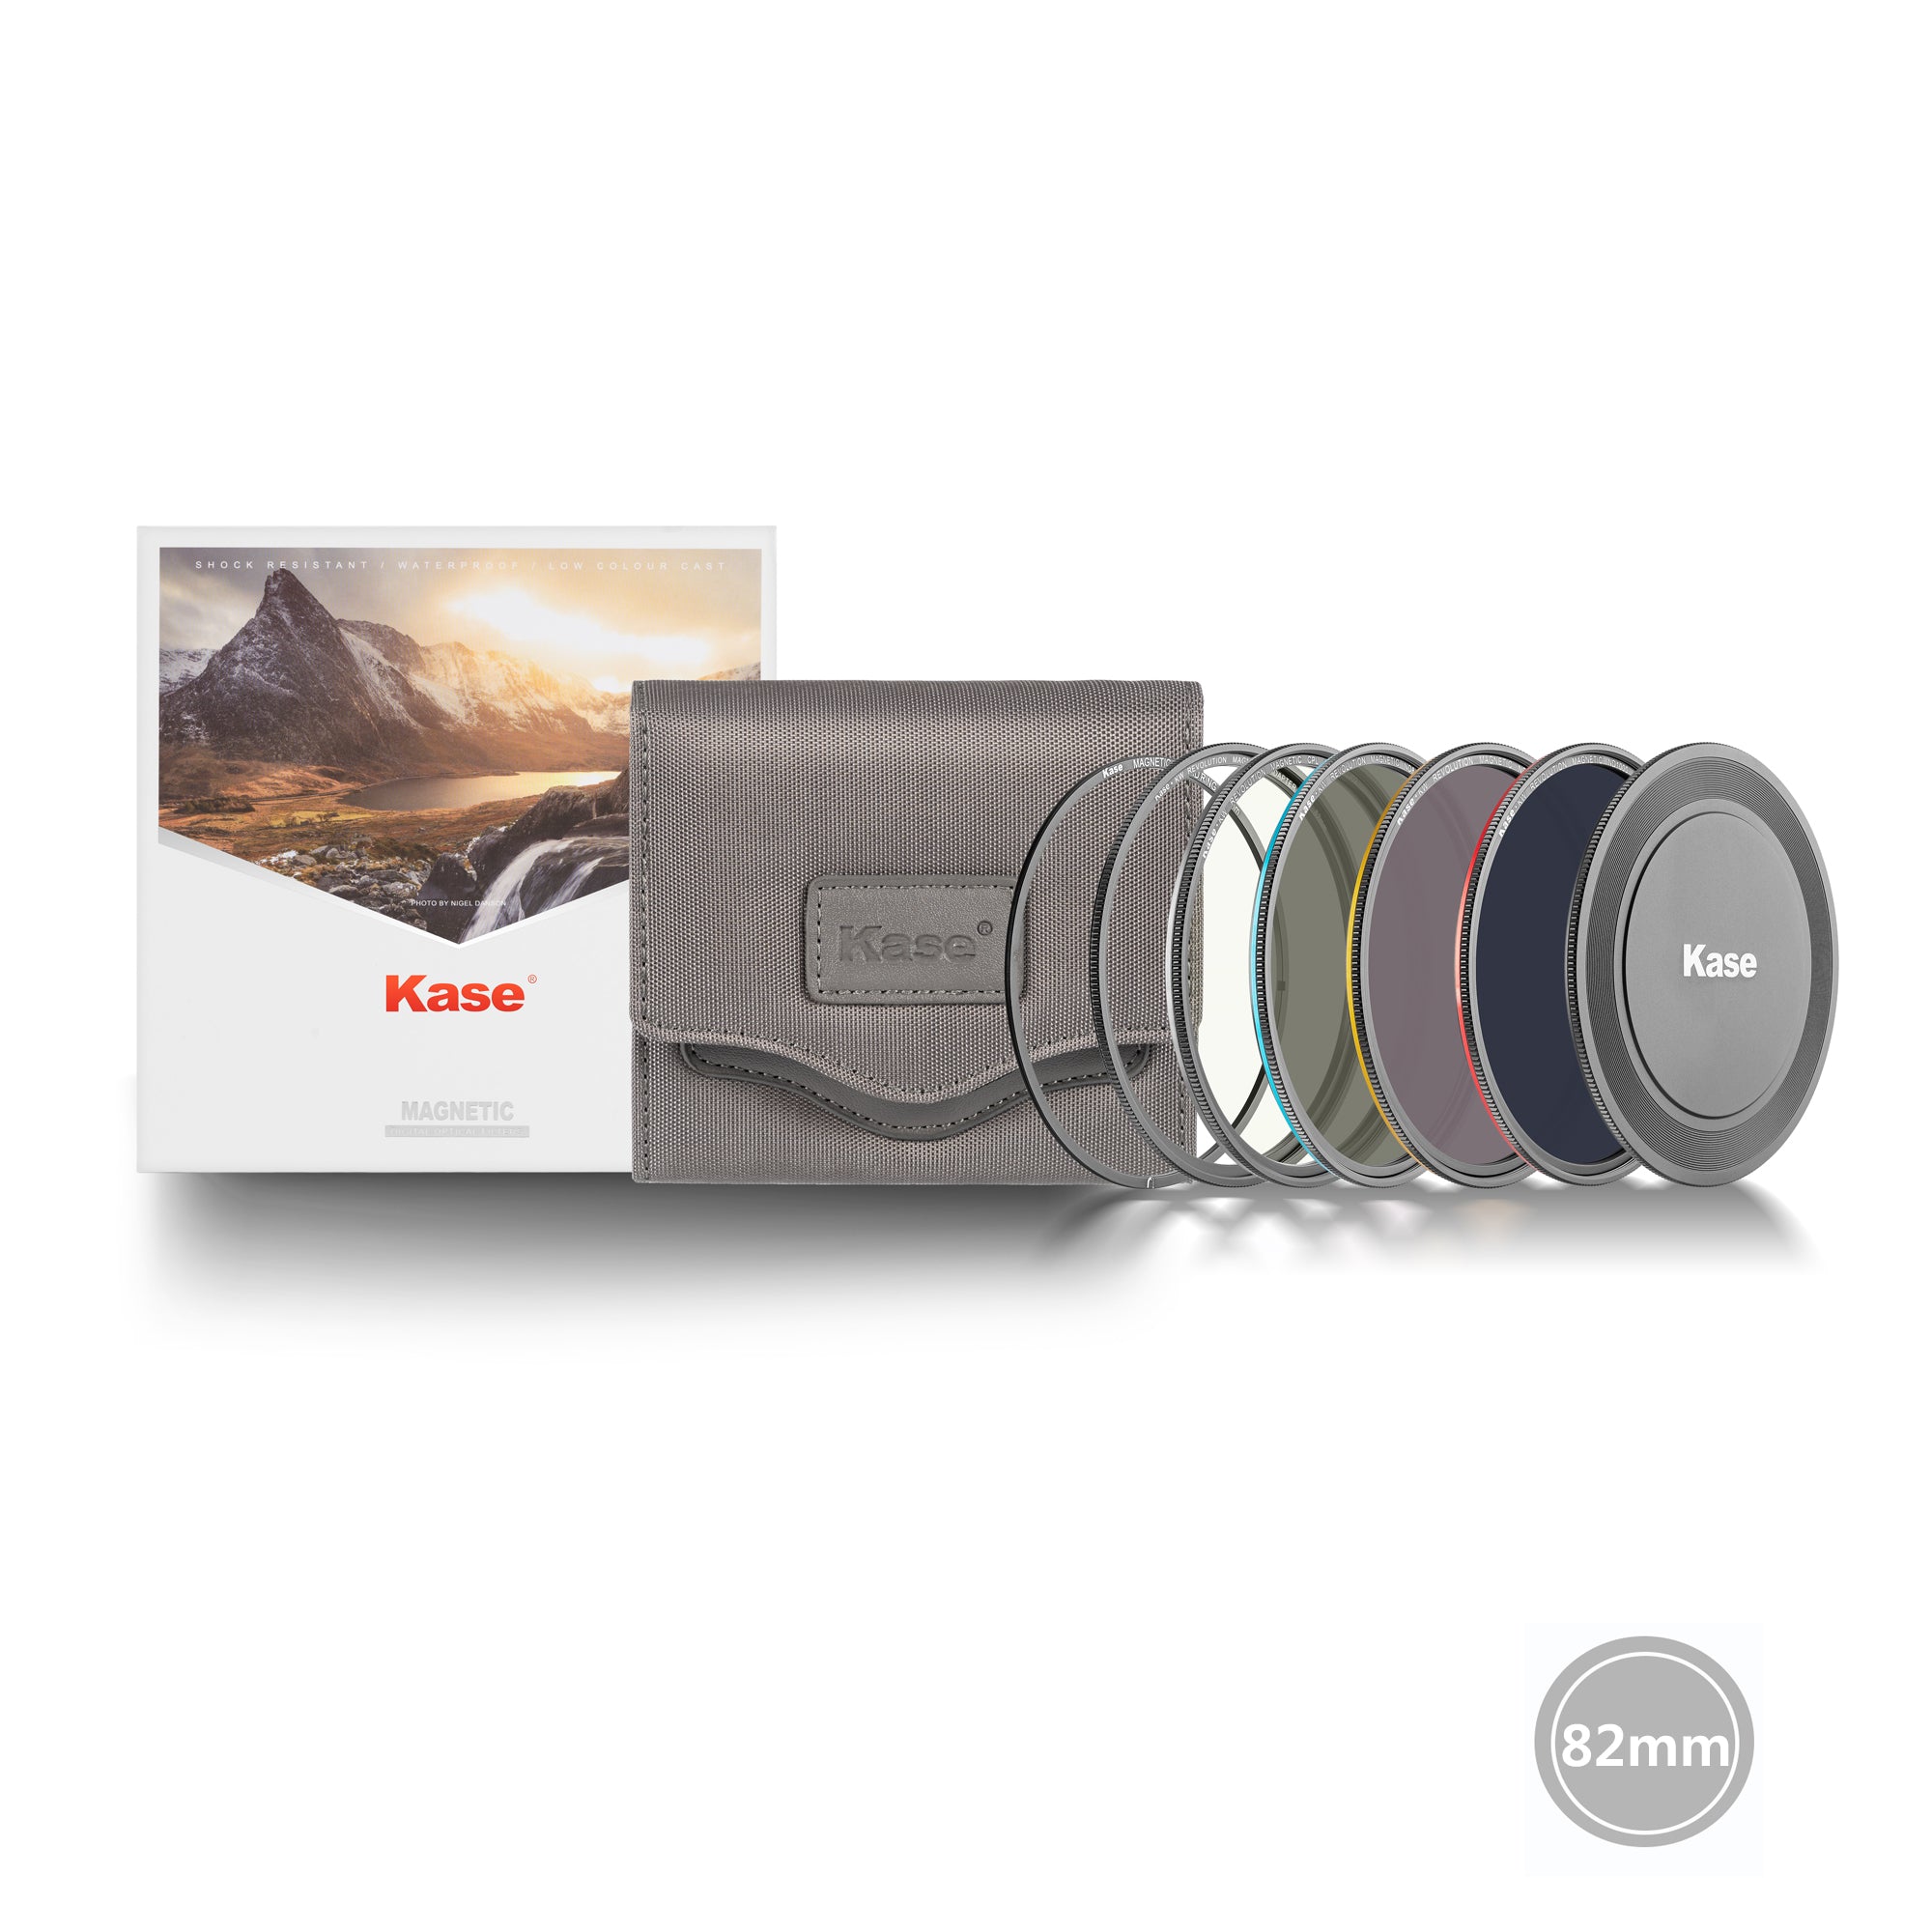 Product Image of Kase Revolution Magnetic Circular Filters 82mm Pro Kit